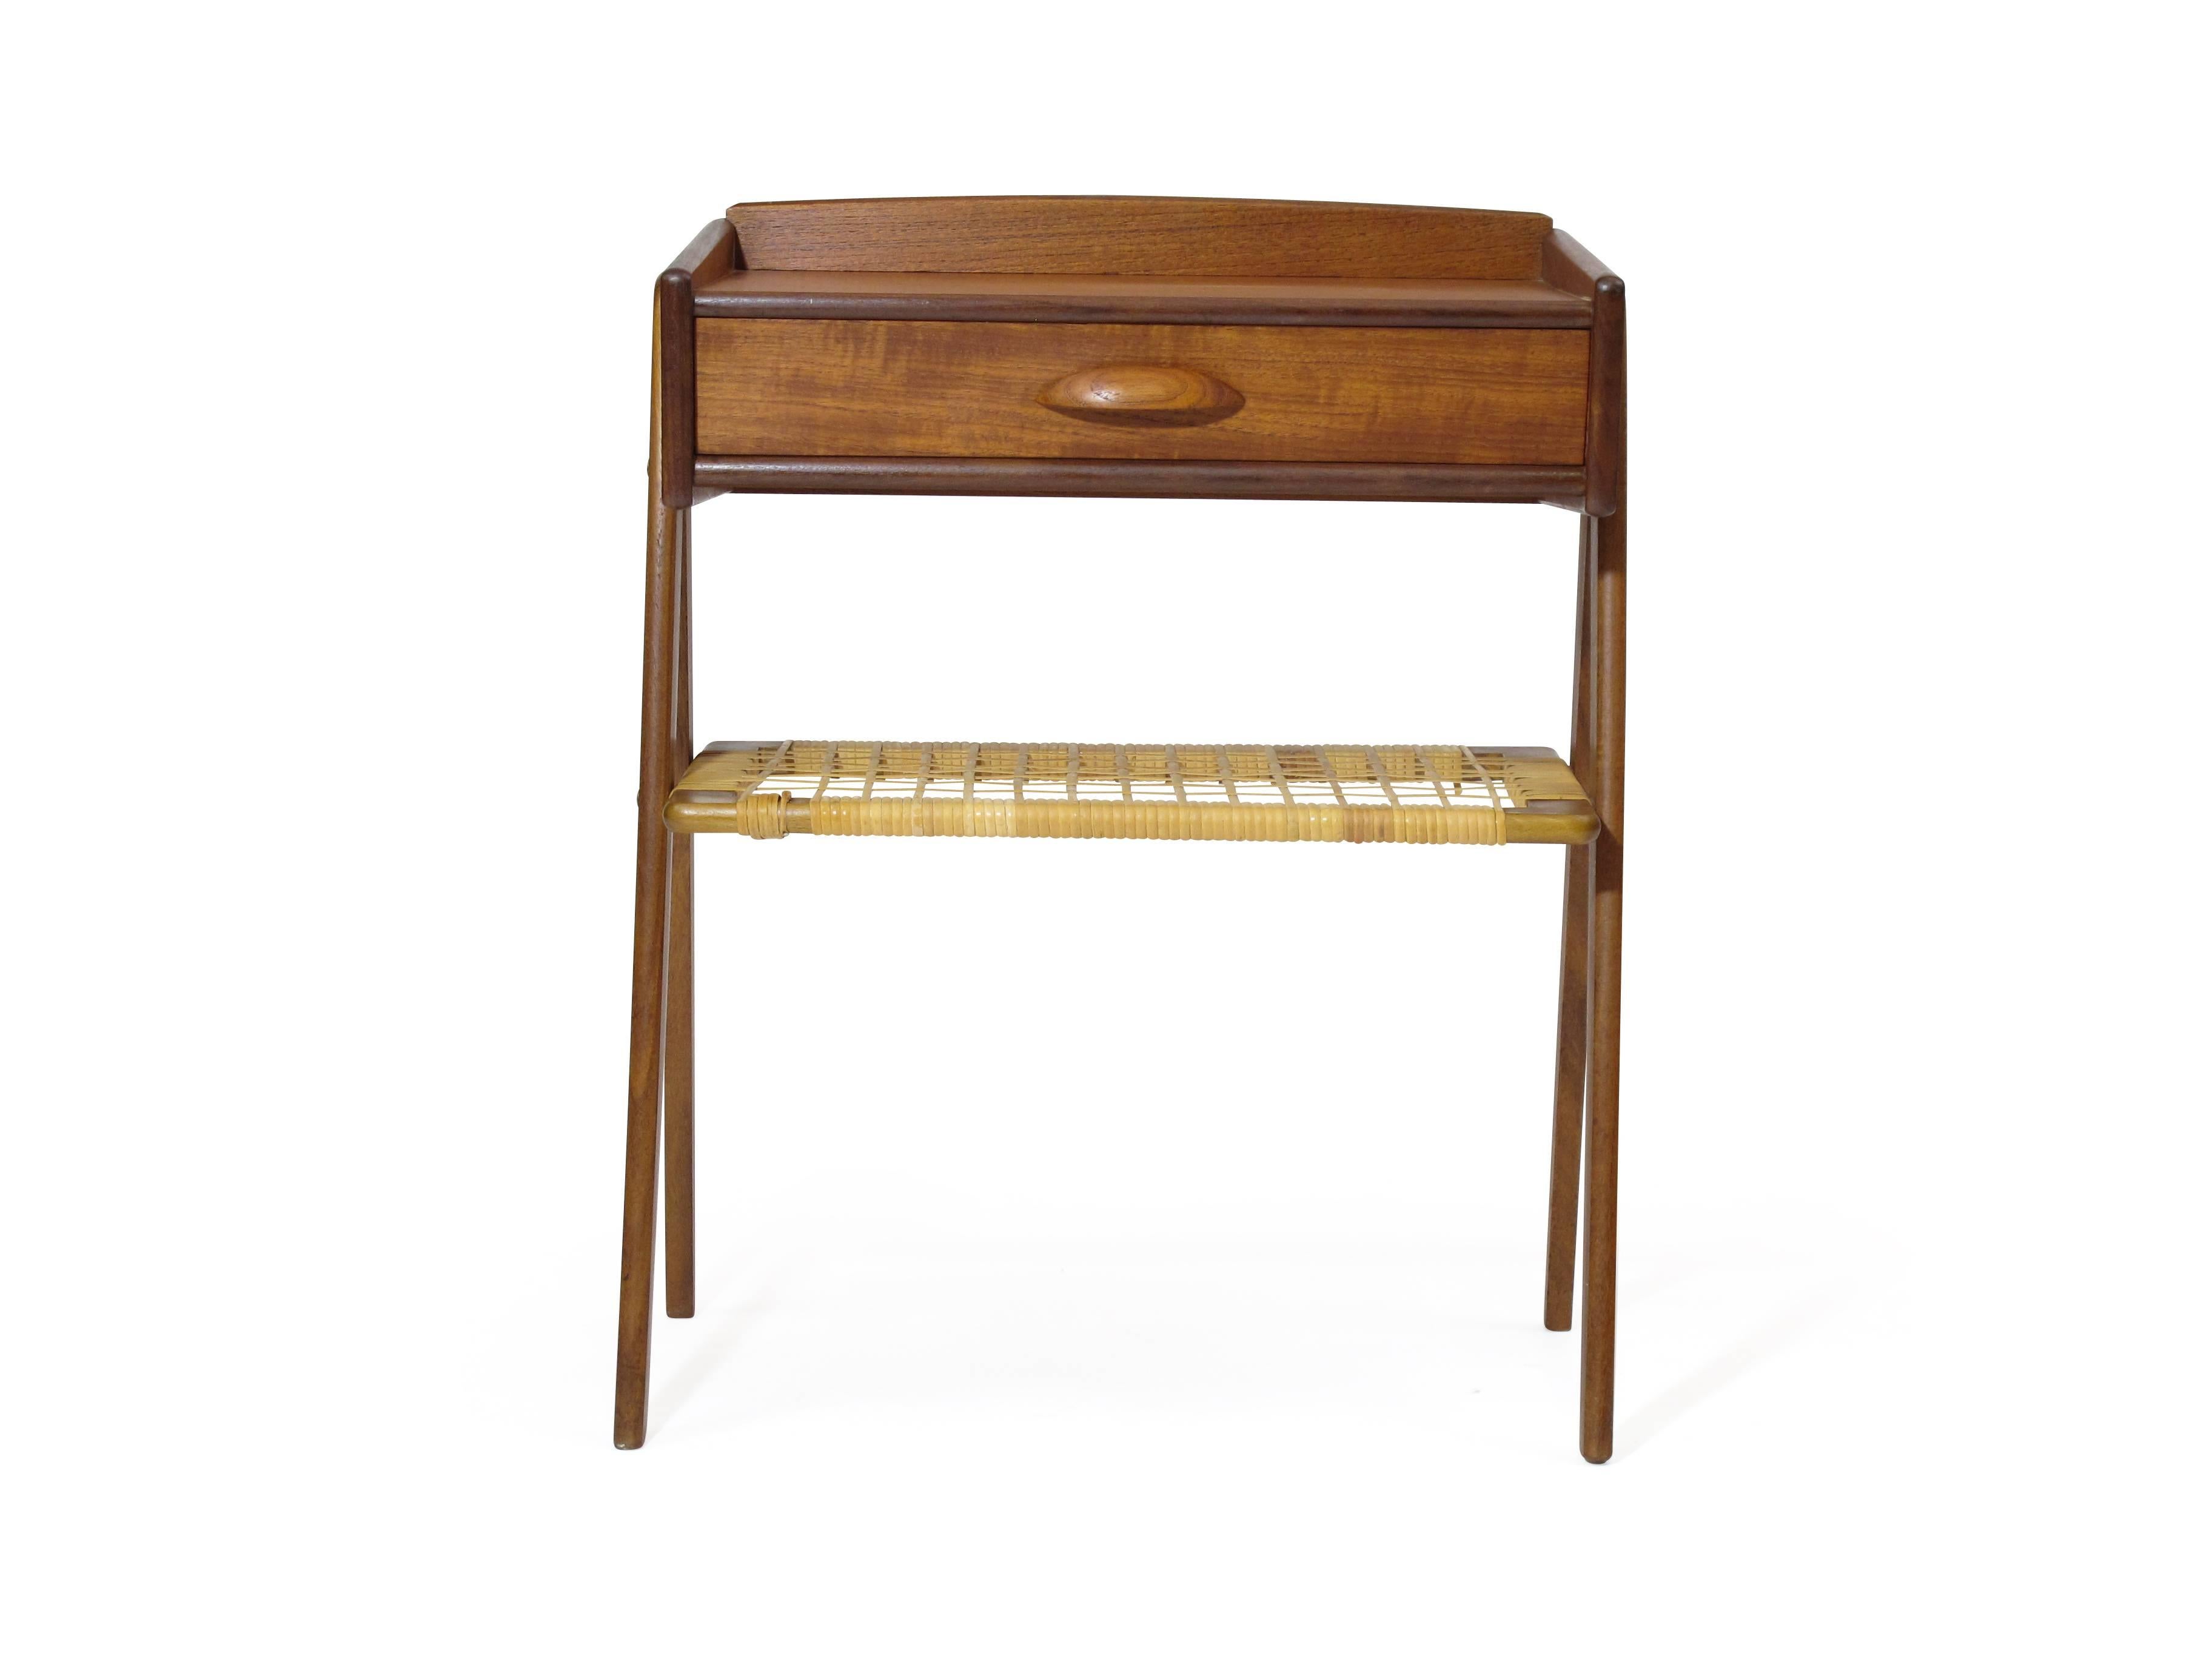 Midcentury Danish side table with one drawer and cane shelf under raised on angled solid teak legs.